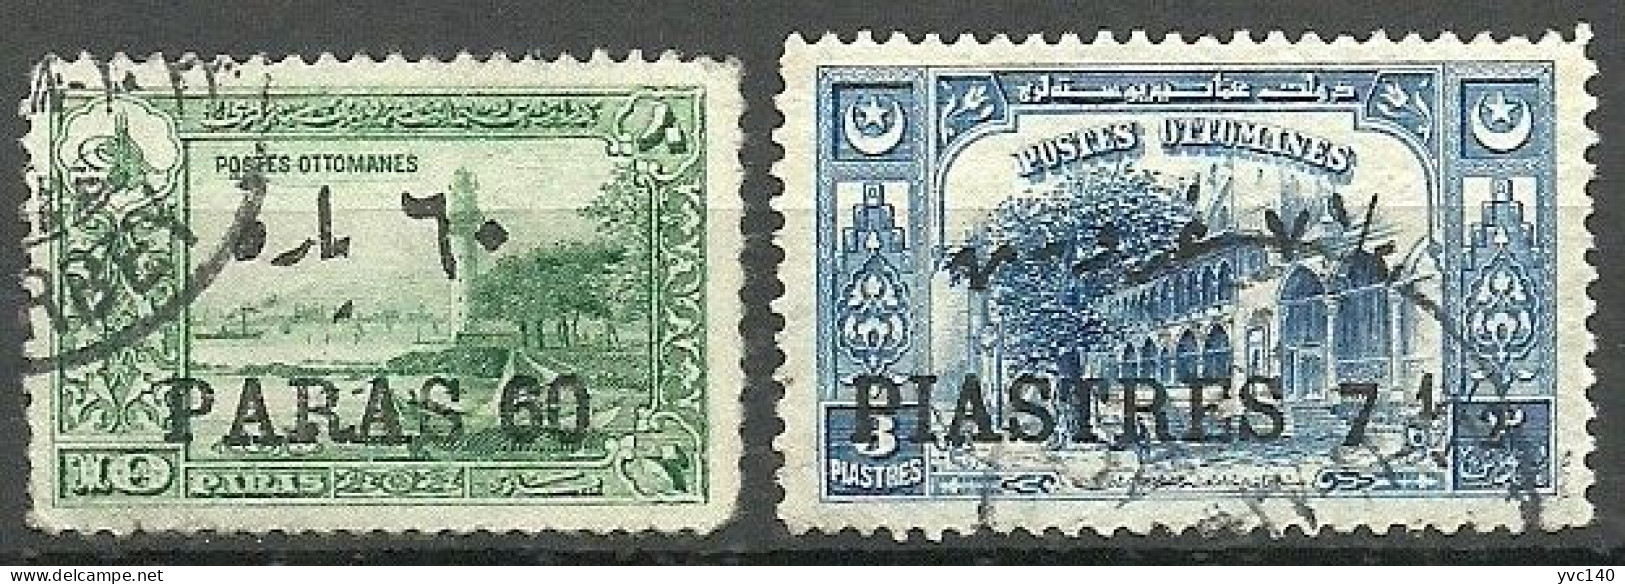 Turkey; 1921 Surcharged Postage Stamps - Usados